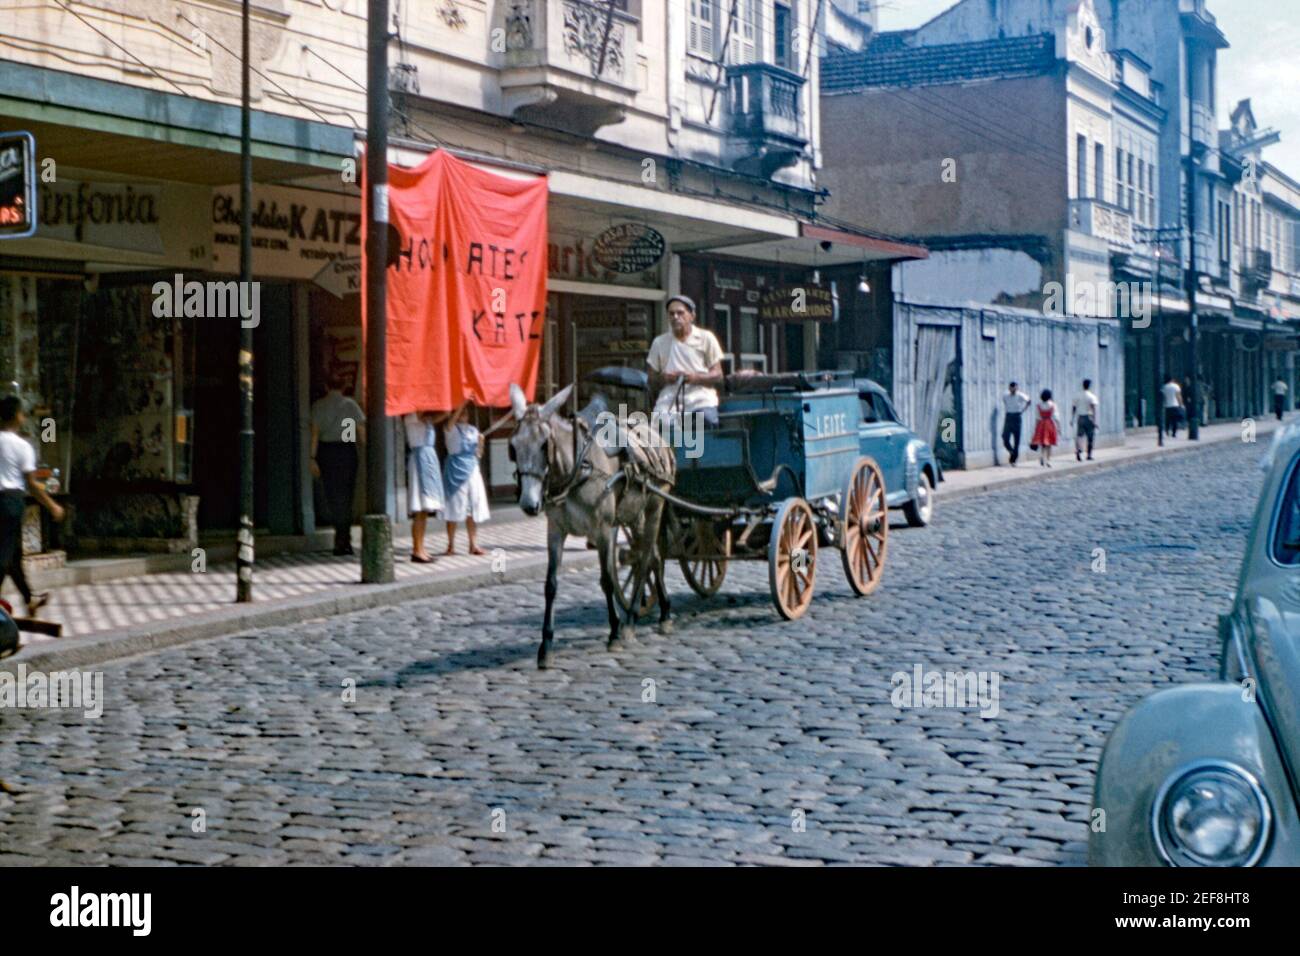 Milk being delivered by a cart being pulled by a donkey on a cobbled street in Petrópolis (also known as The Imperial City), Brazil 1961. It was common for many fresh goods were delivered door to door by carts pulled by animals or by motorised vehicles. On the side of the cart is the word ‘Leite’ – Portuguese for milk. The city of Petrópolis is located 68 km (42 ml) north east of Rio de Janeiro. It is the largest and most populous city in the Fluminense Mountain Region. This image is from an old amateur 35mm colour transparency. Stock Photo